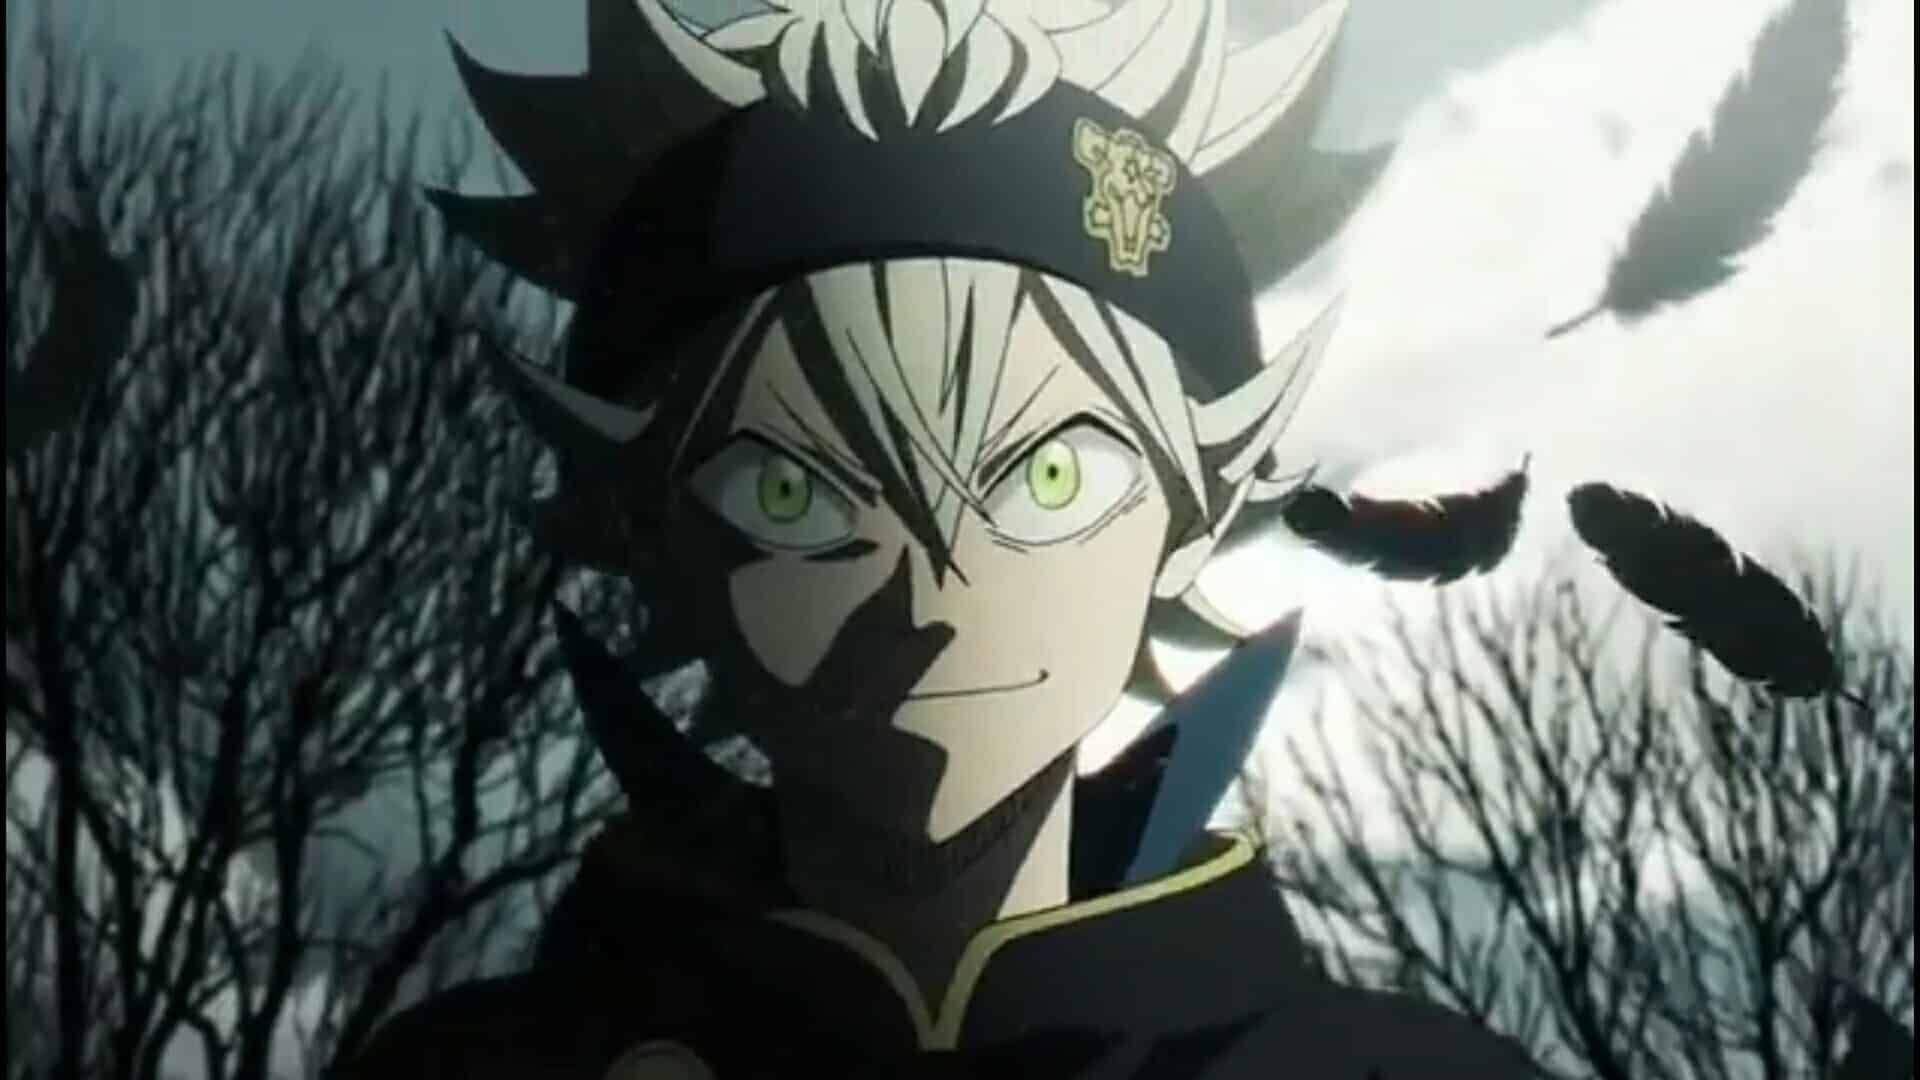 Black Clover Aesthetic Wallpapers - Wallpaper Cave